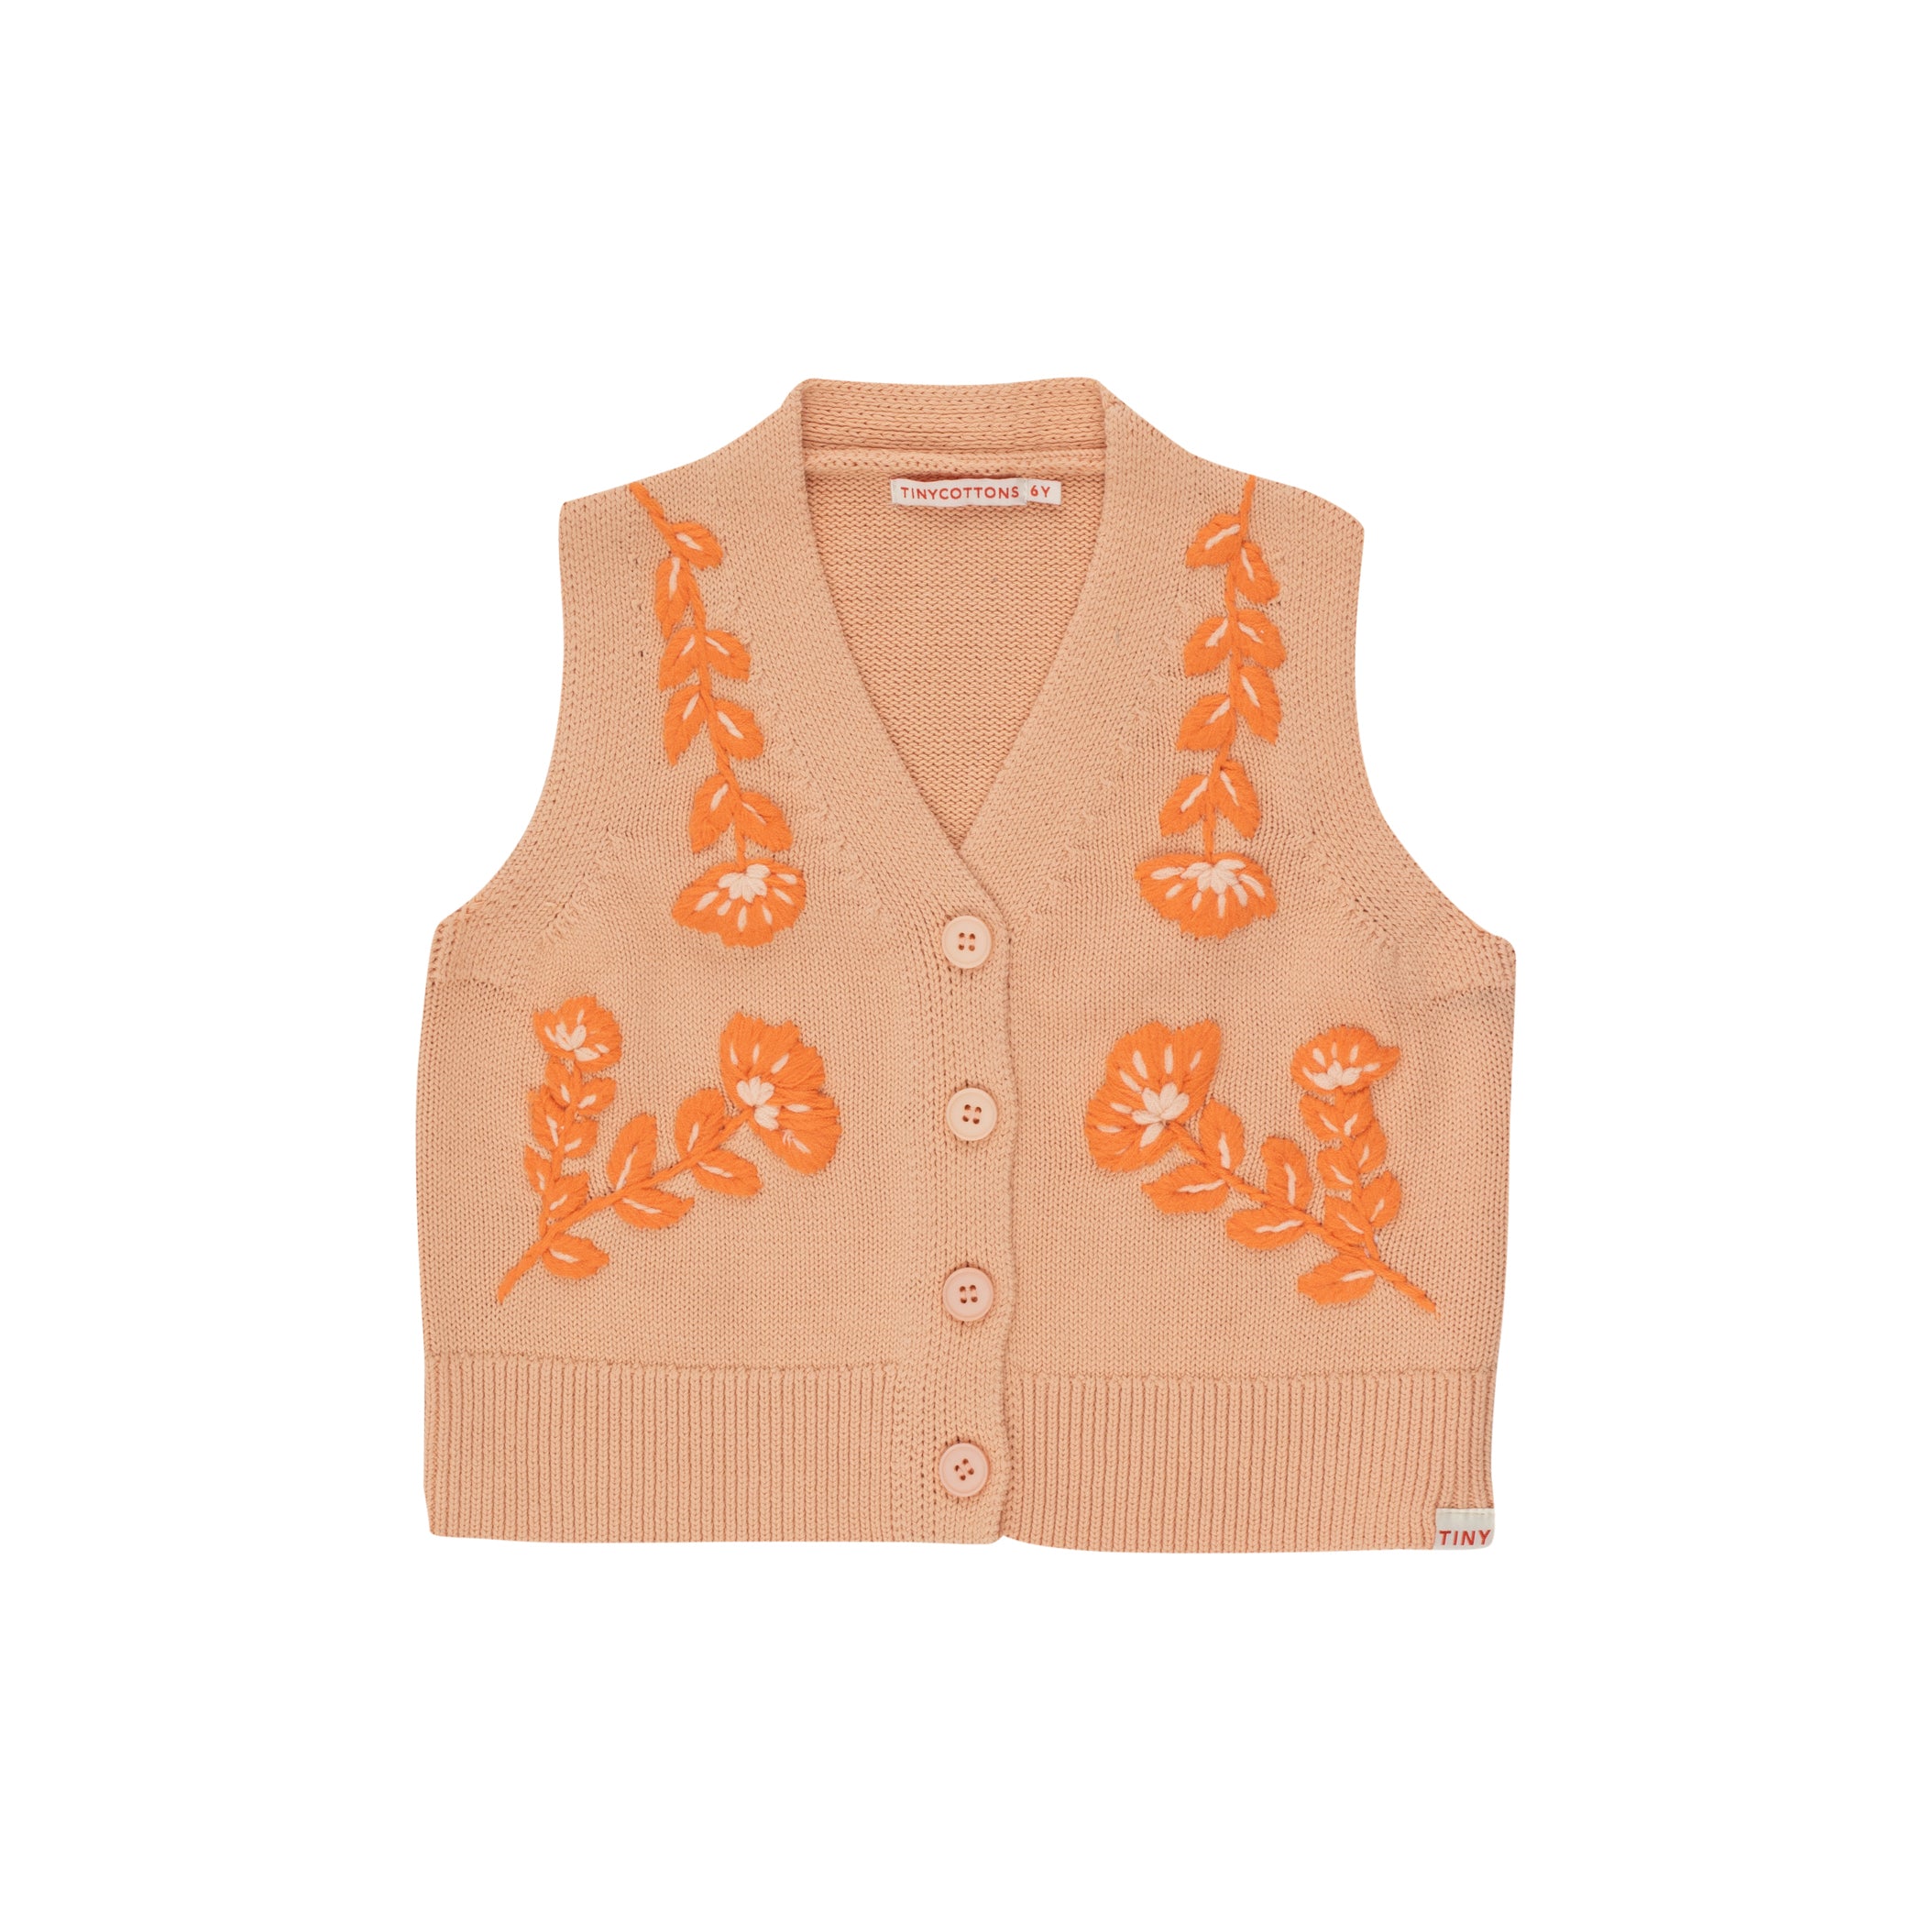 Girls Apricot Embroidered Cotton Gilet